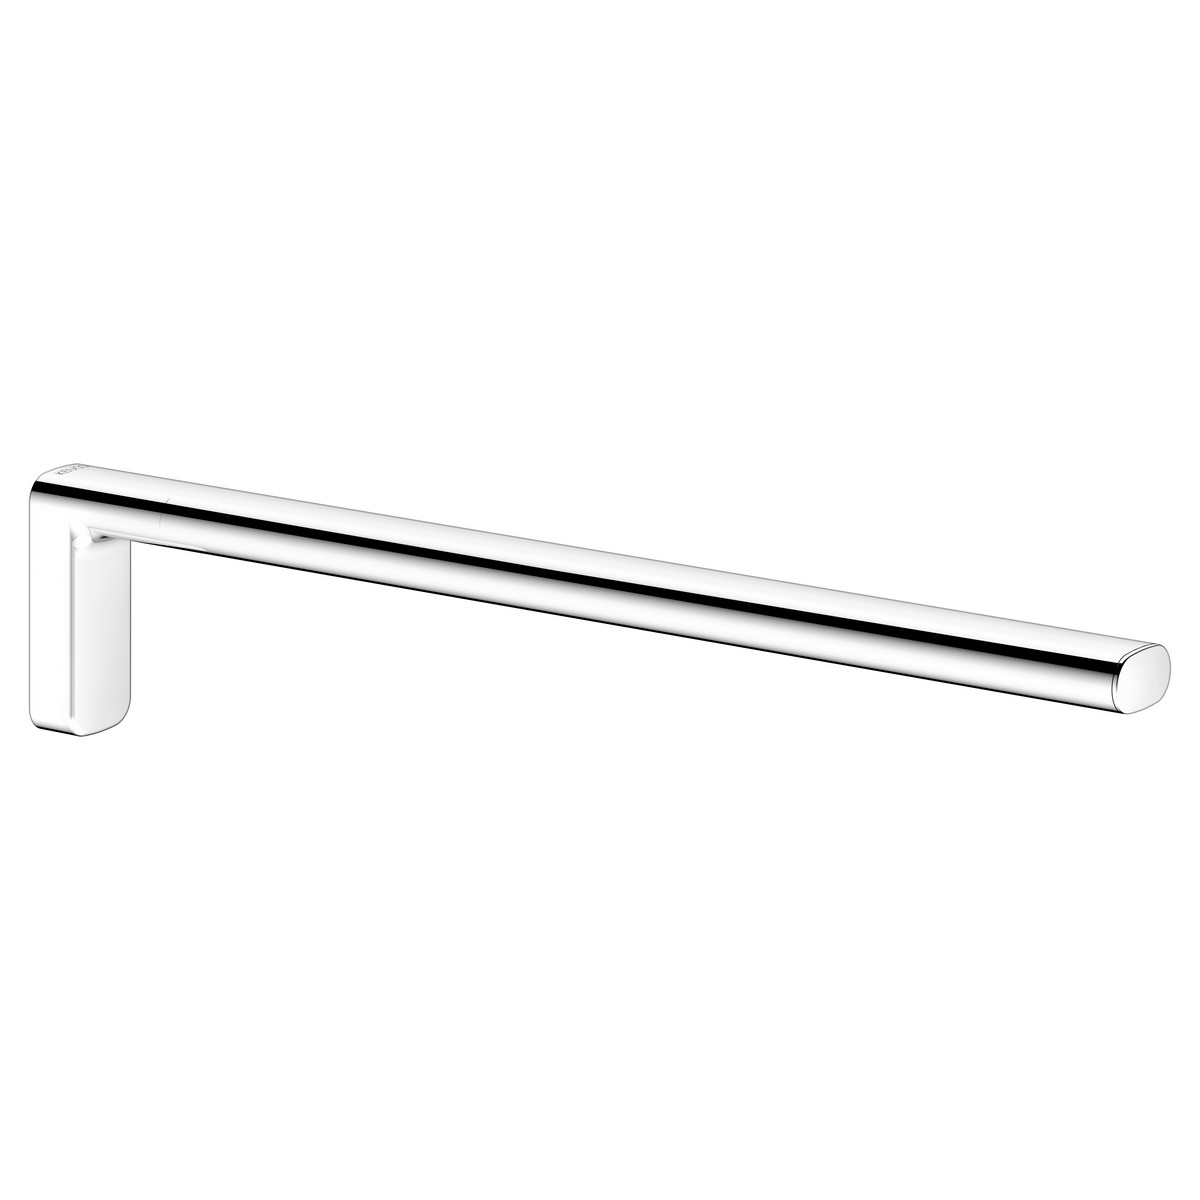 KEUCO 135200000 EDITION ACTIS 17 3/4 INCH WALL MOUNTED SINGLE TOWEL HOLDER